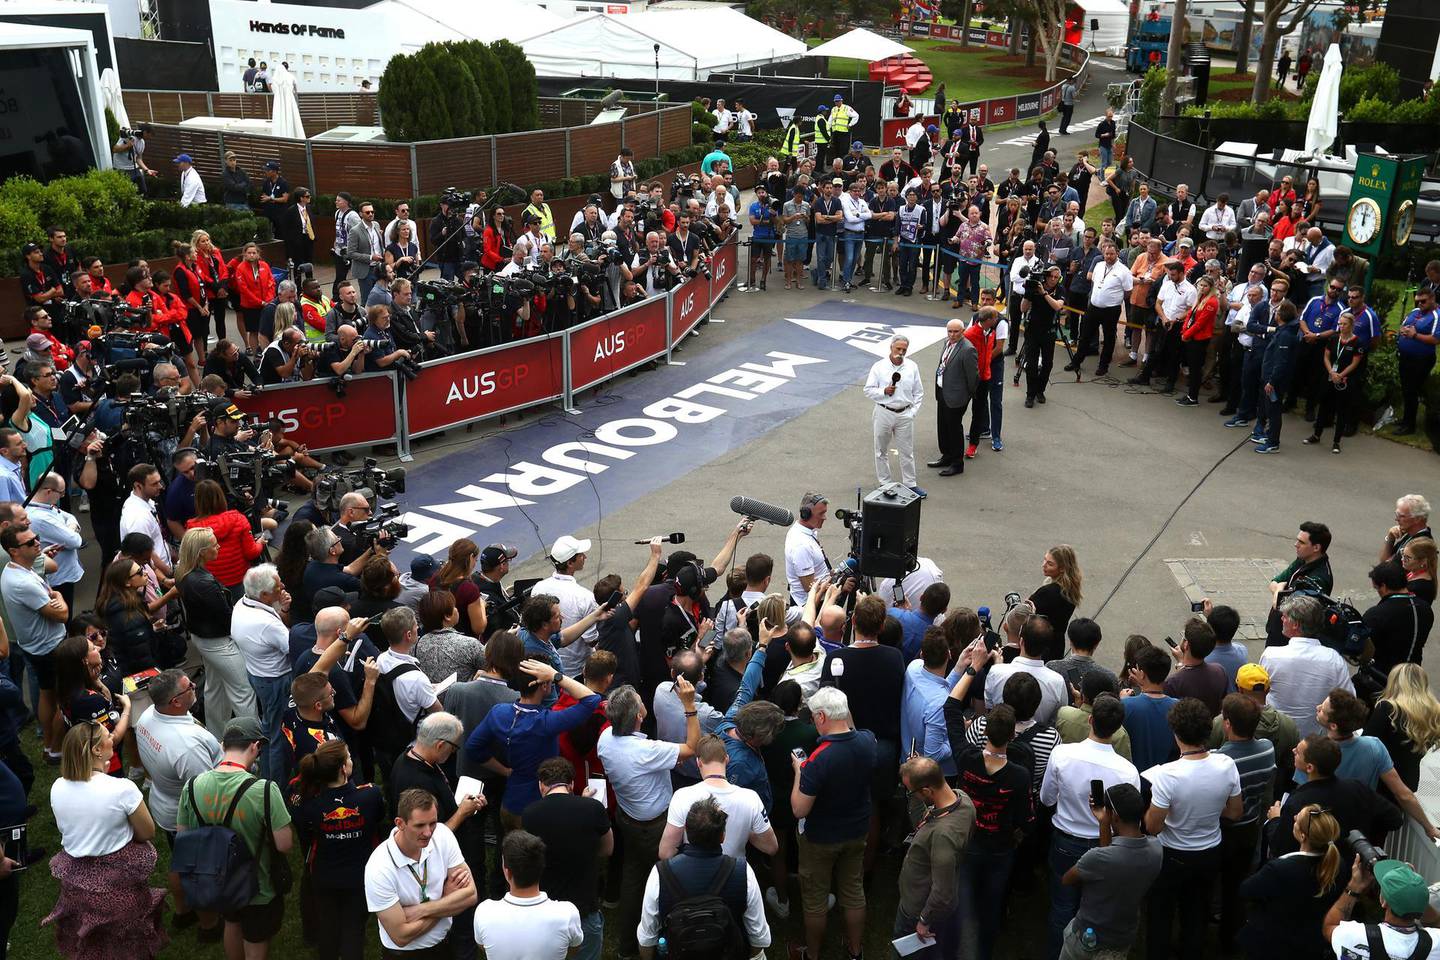 MELBOURNE, AUSTRALIA - MARCH 13: Chase Carey, CEO and Executive Chairman of the Formula One Group, talks as a press conference is held outside the paddock after for the F1 Grand Prix of Australia was cancelled at Melbourne Grand Prix Circuit on March 13, 2020 in Melbourne, Australia. (Photo by Robert Cianflone/Getty Images)